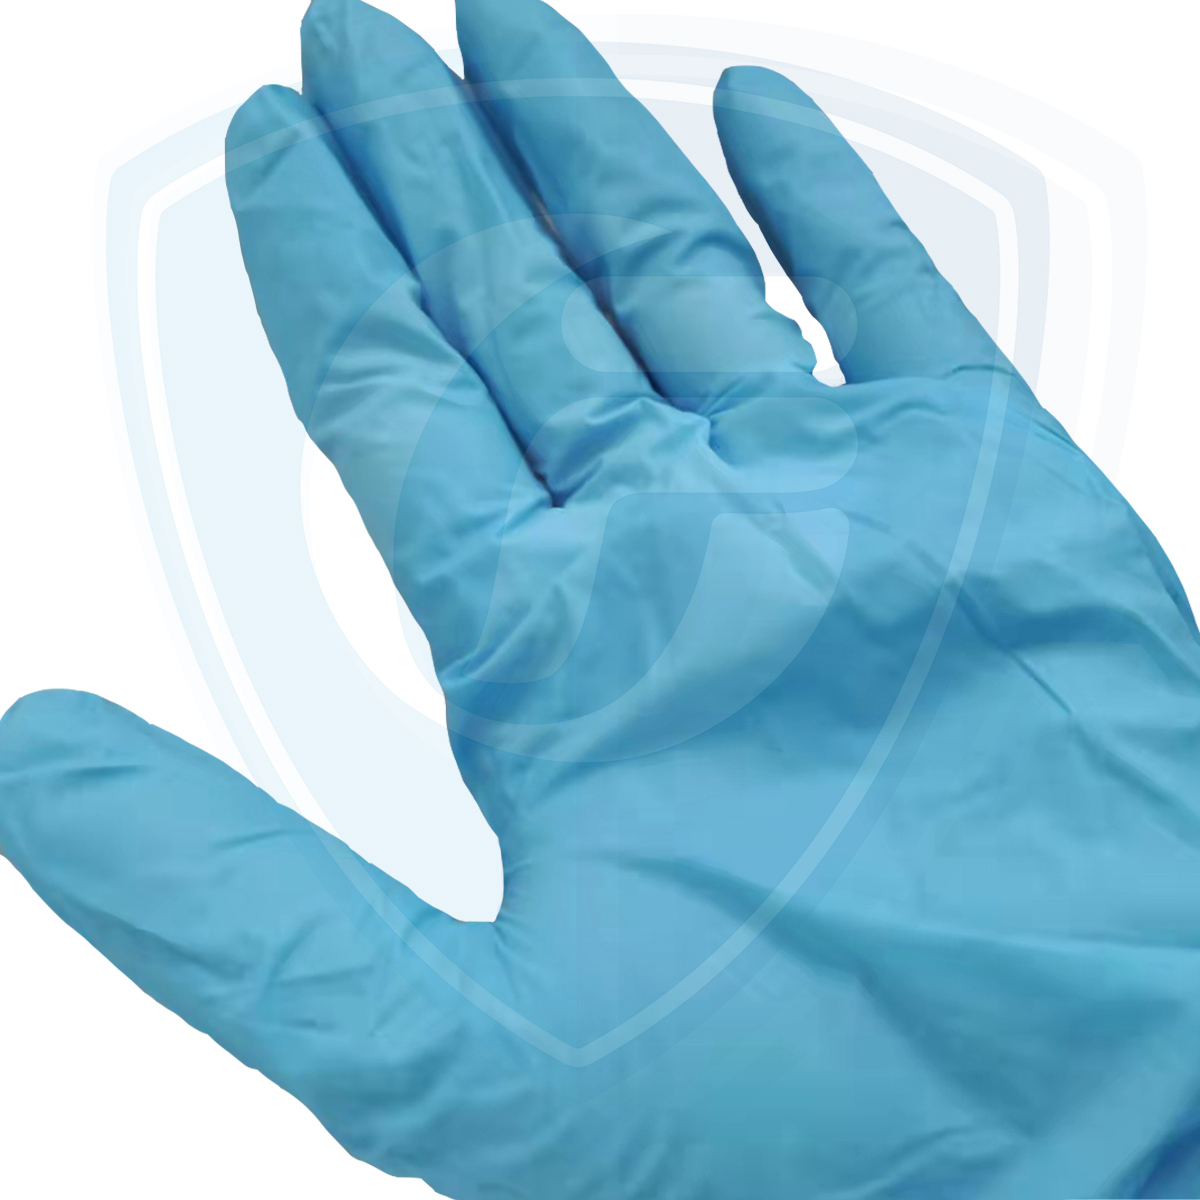 Great Value Powder-free Disposable Nitrile Exam Gloves Anti-Static 